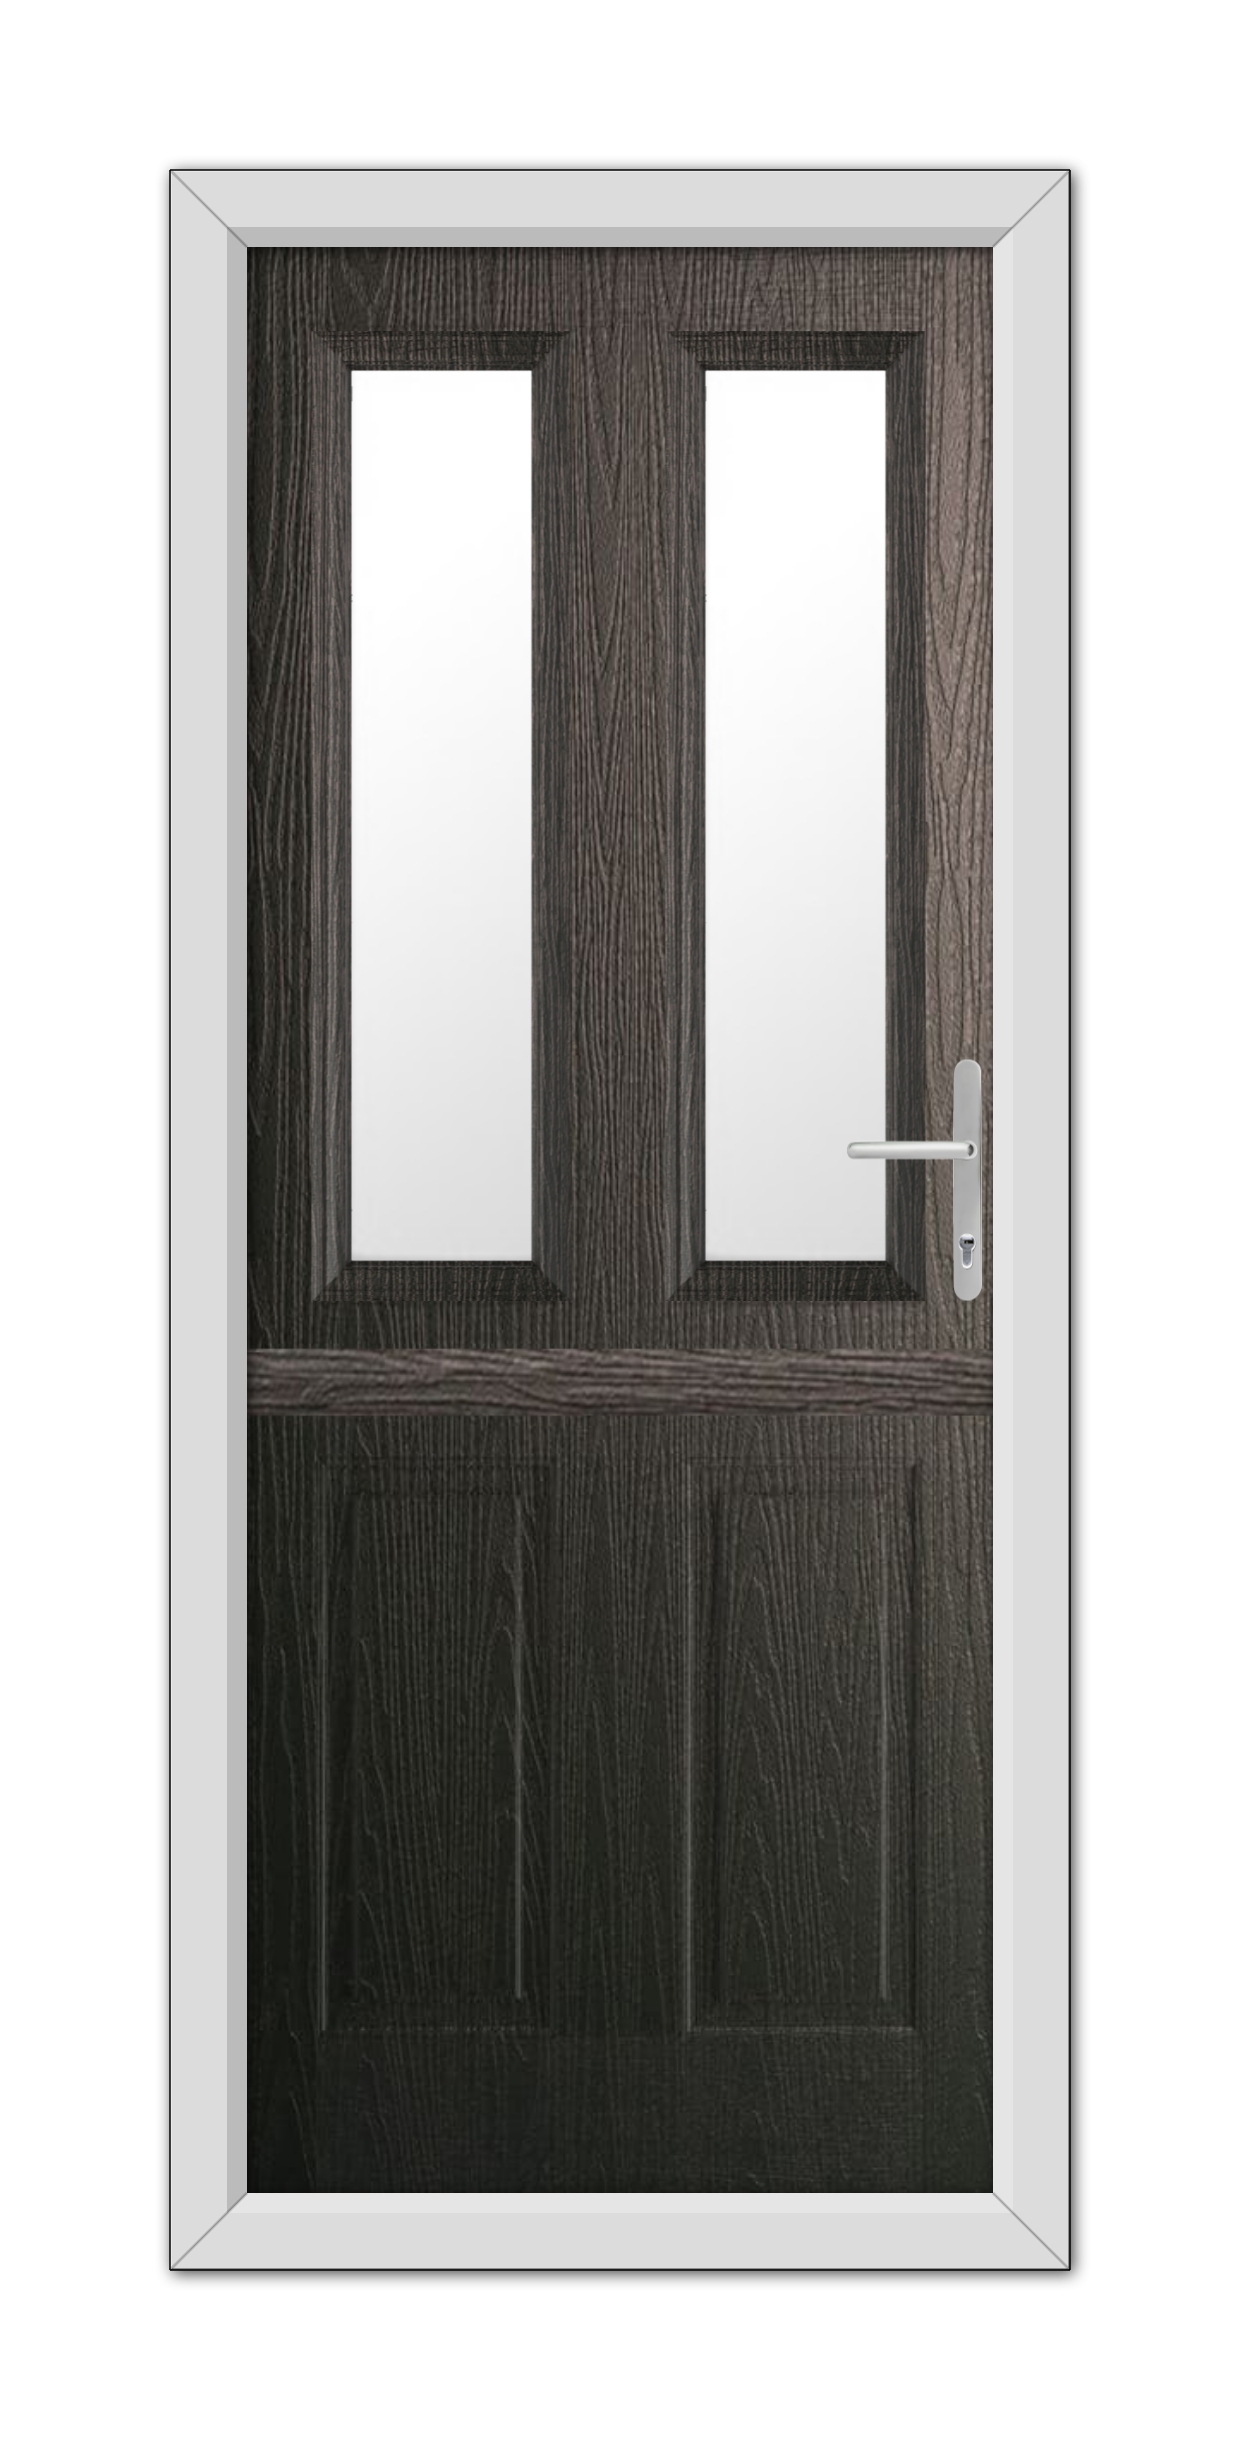 A modern Schwarzbraun Whitmore Stable Composite Door 48mm Timber Core featuring two vertical glass panels and a metallic handle, set within a white frame.